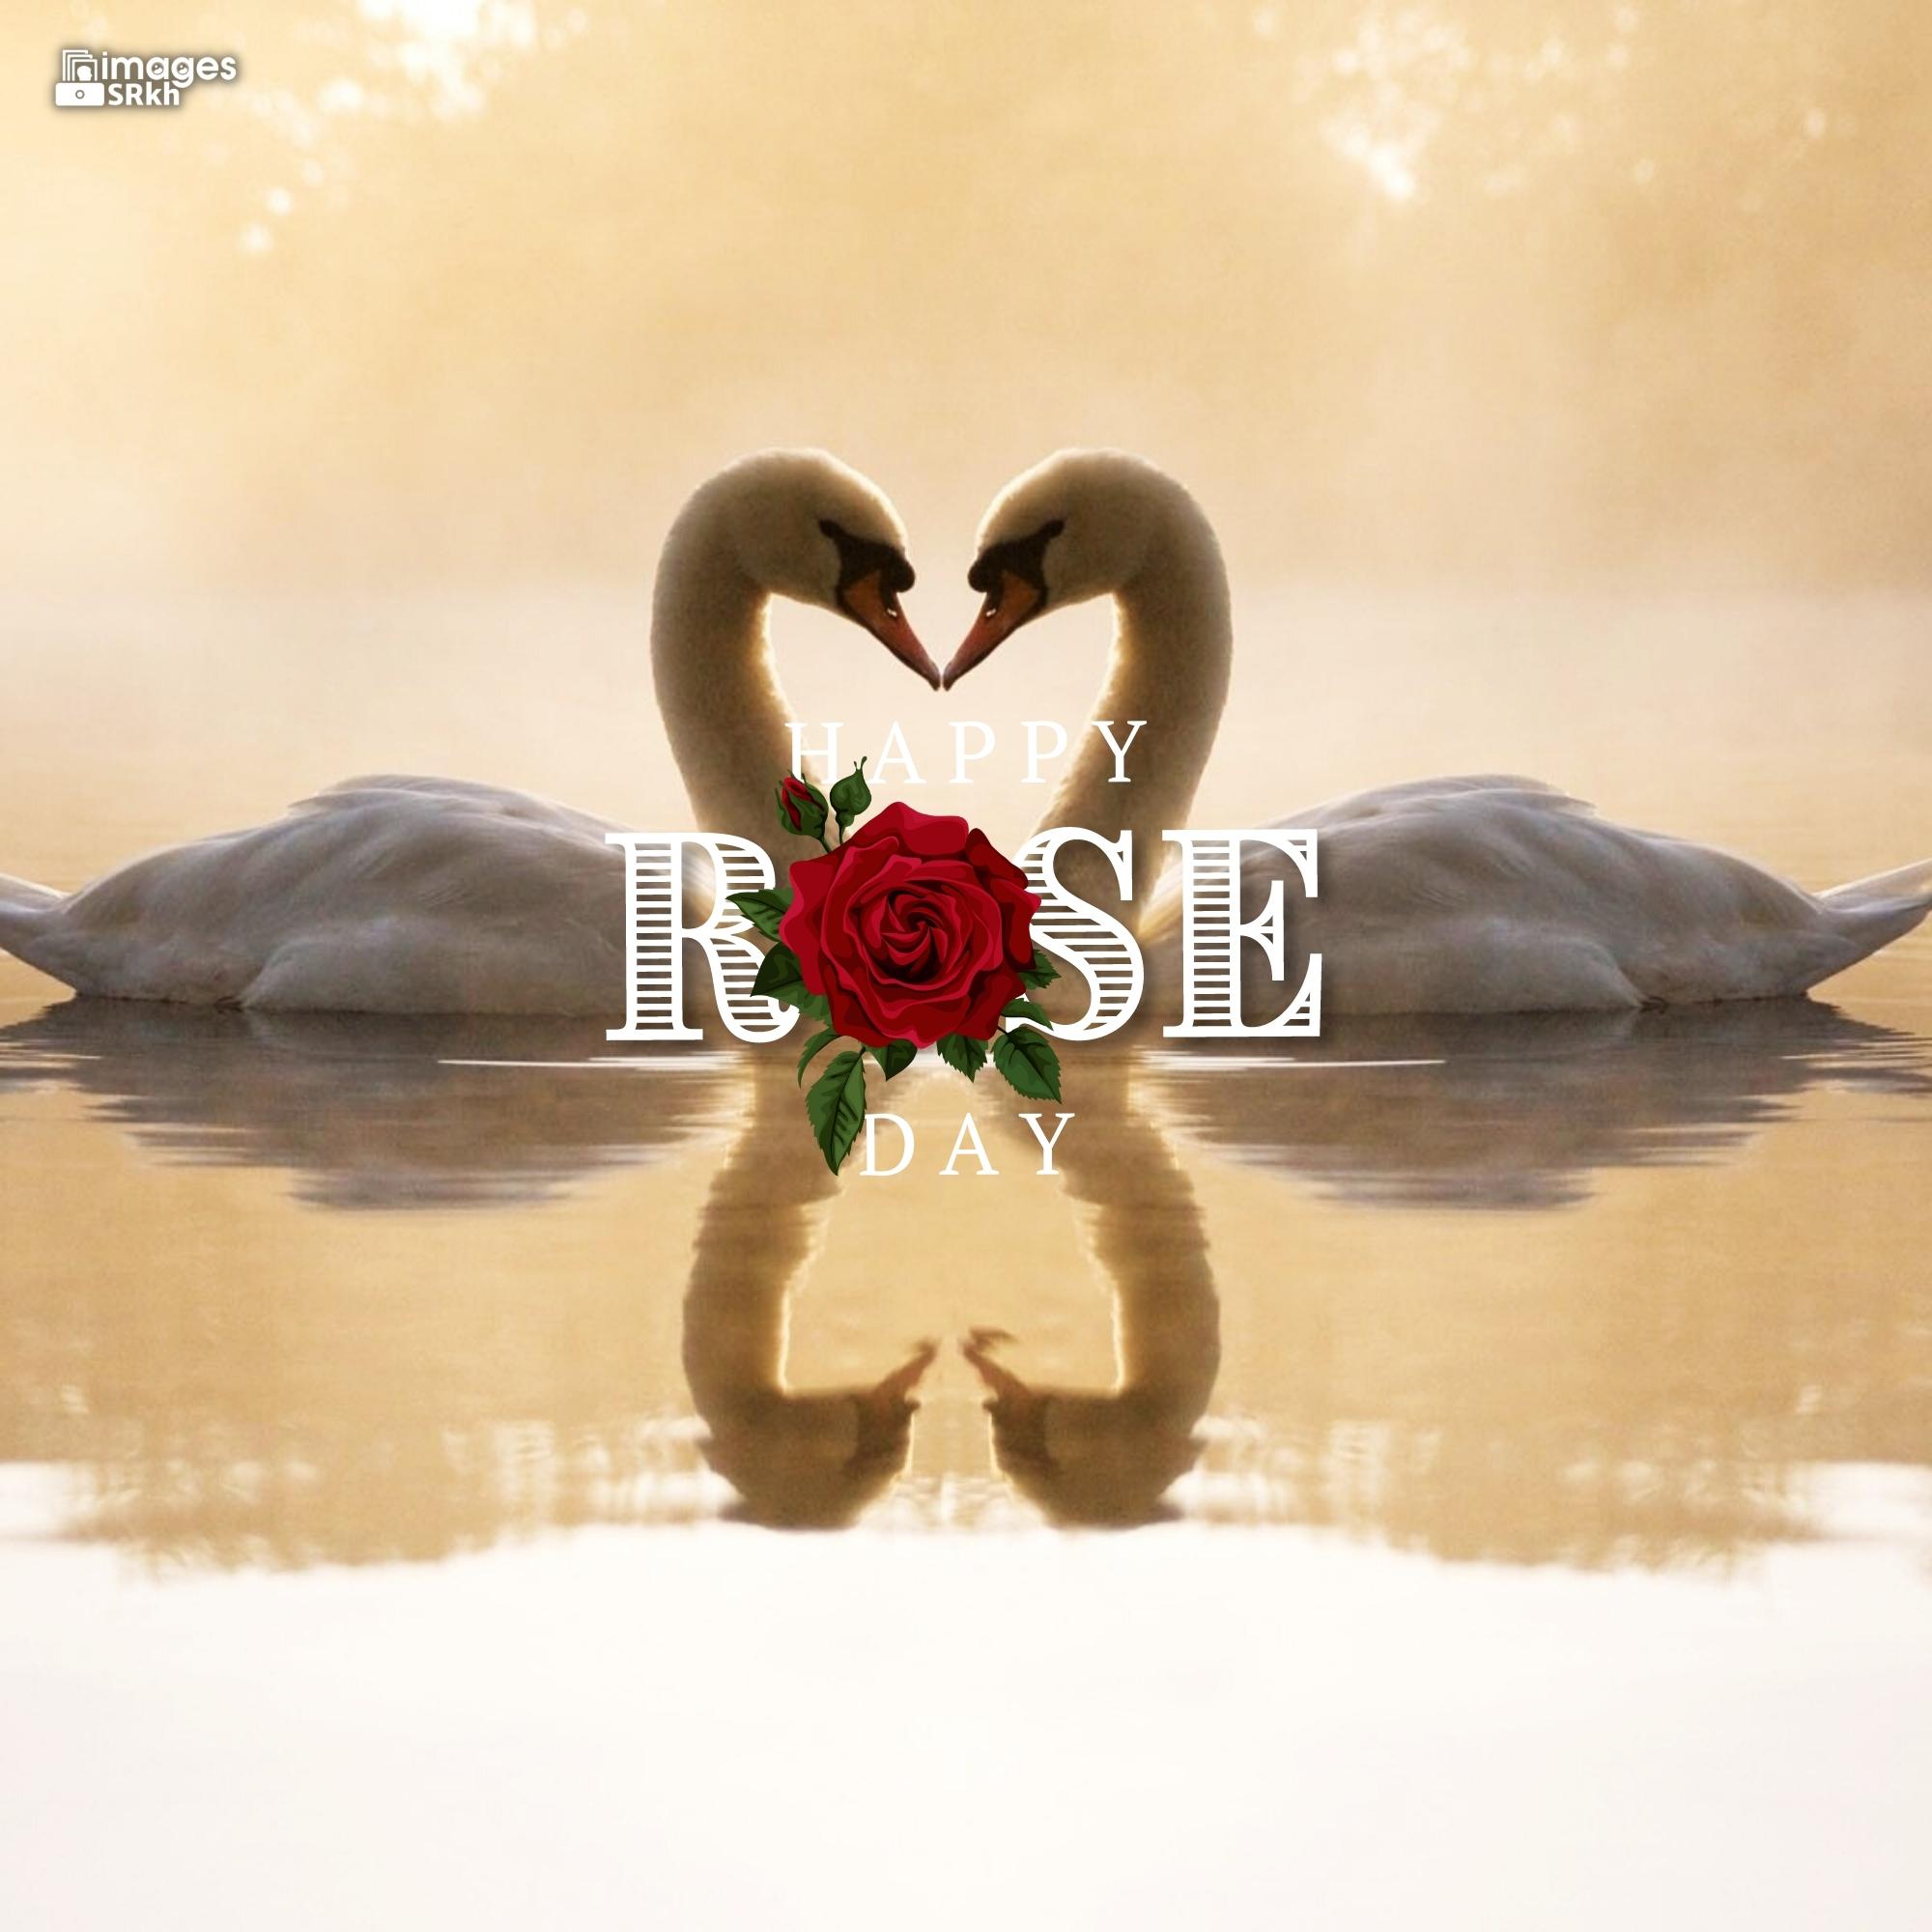 Romantic Rose Day Images Hd Download (19)